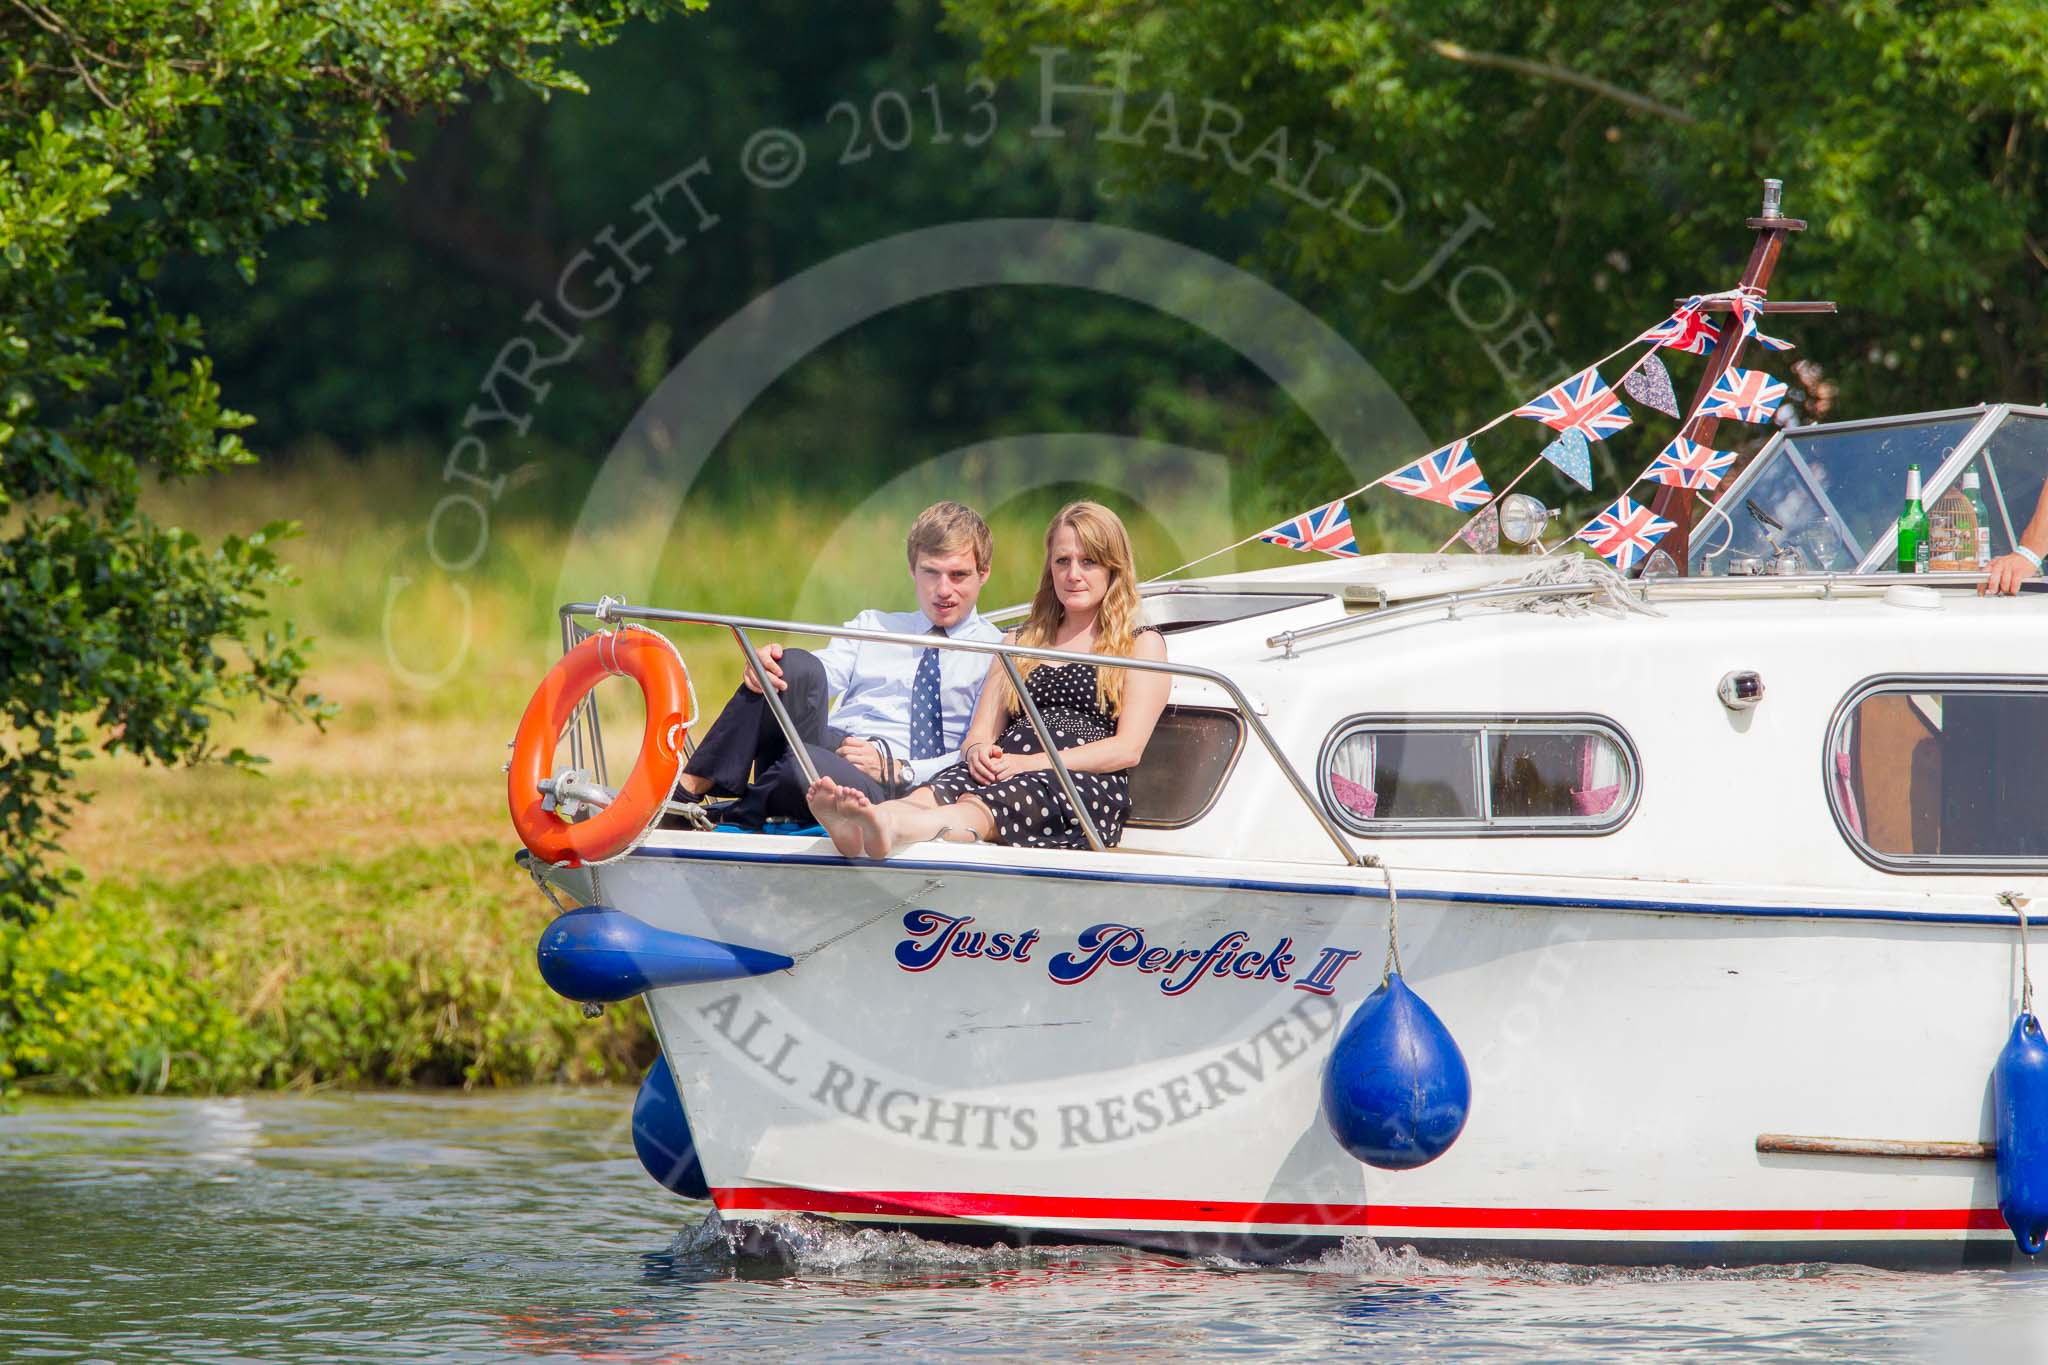 Henley Royal Regatta 2013, Saturday: Pleasure boat traffic next the the HRR race course - "Just Perfick II" with a young couple. Image #162, 06 July 2013 10:54 River Thames, Henley on Thames, UK